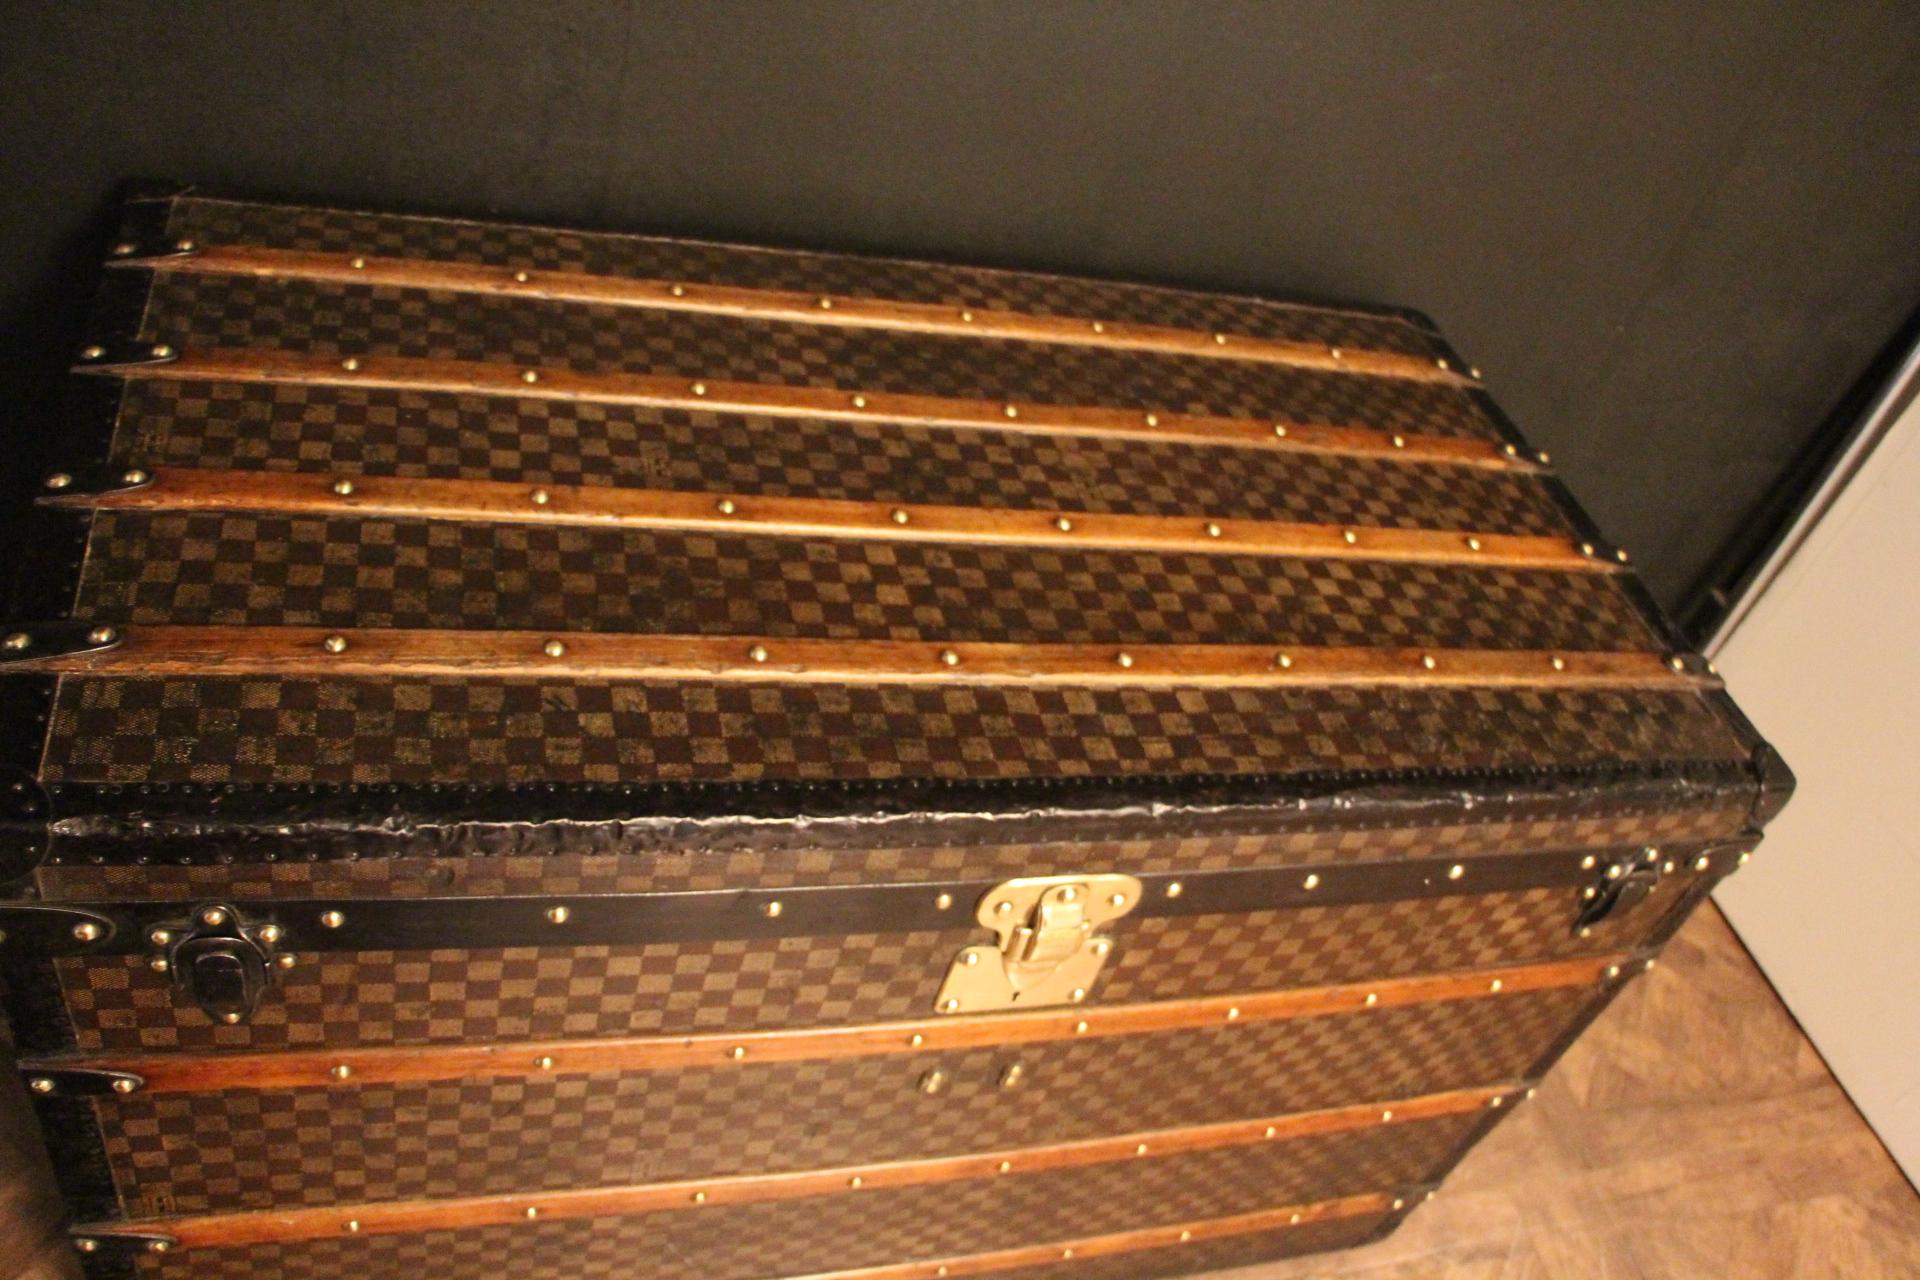 19th Century Extra Large Checkers Louis Vuitton Trunk, Louis Vuitton Steamer Trunk